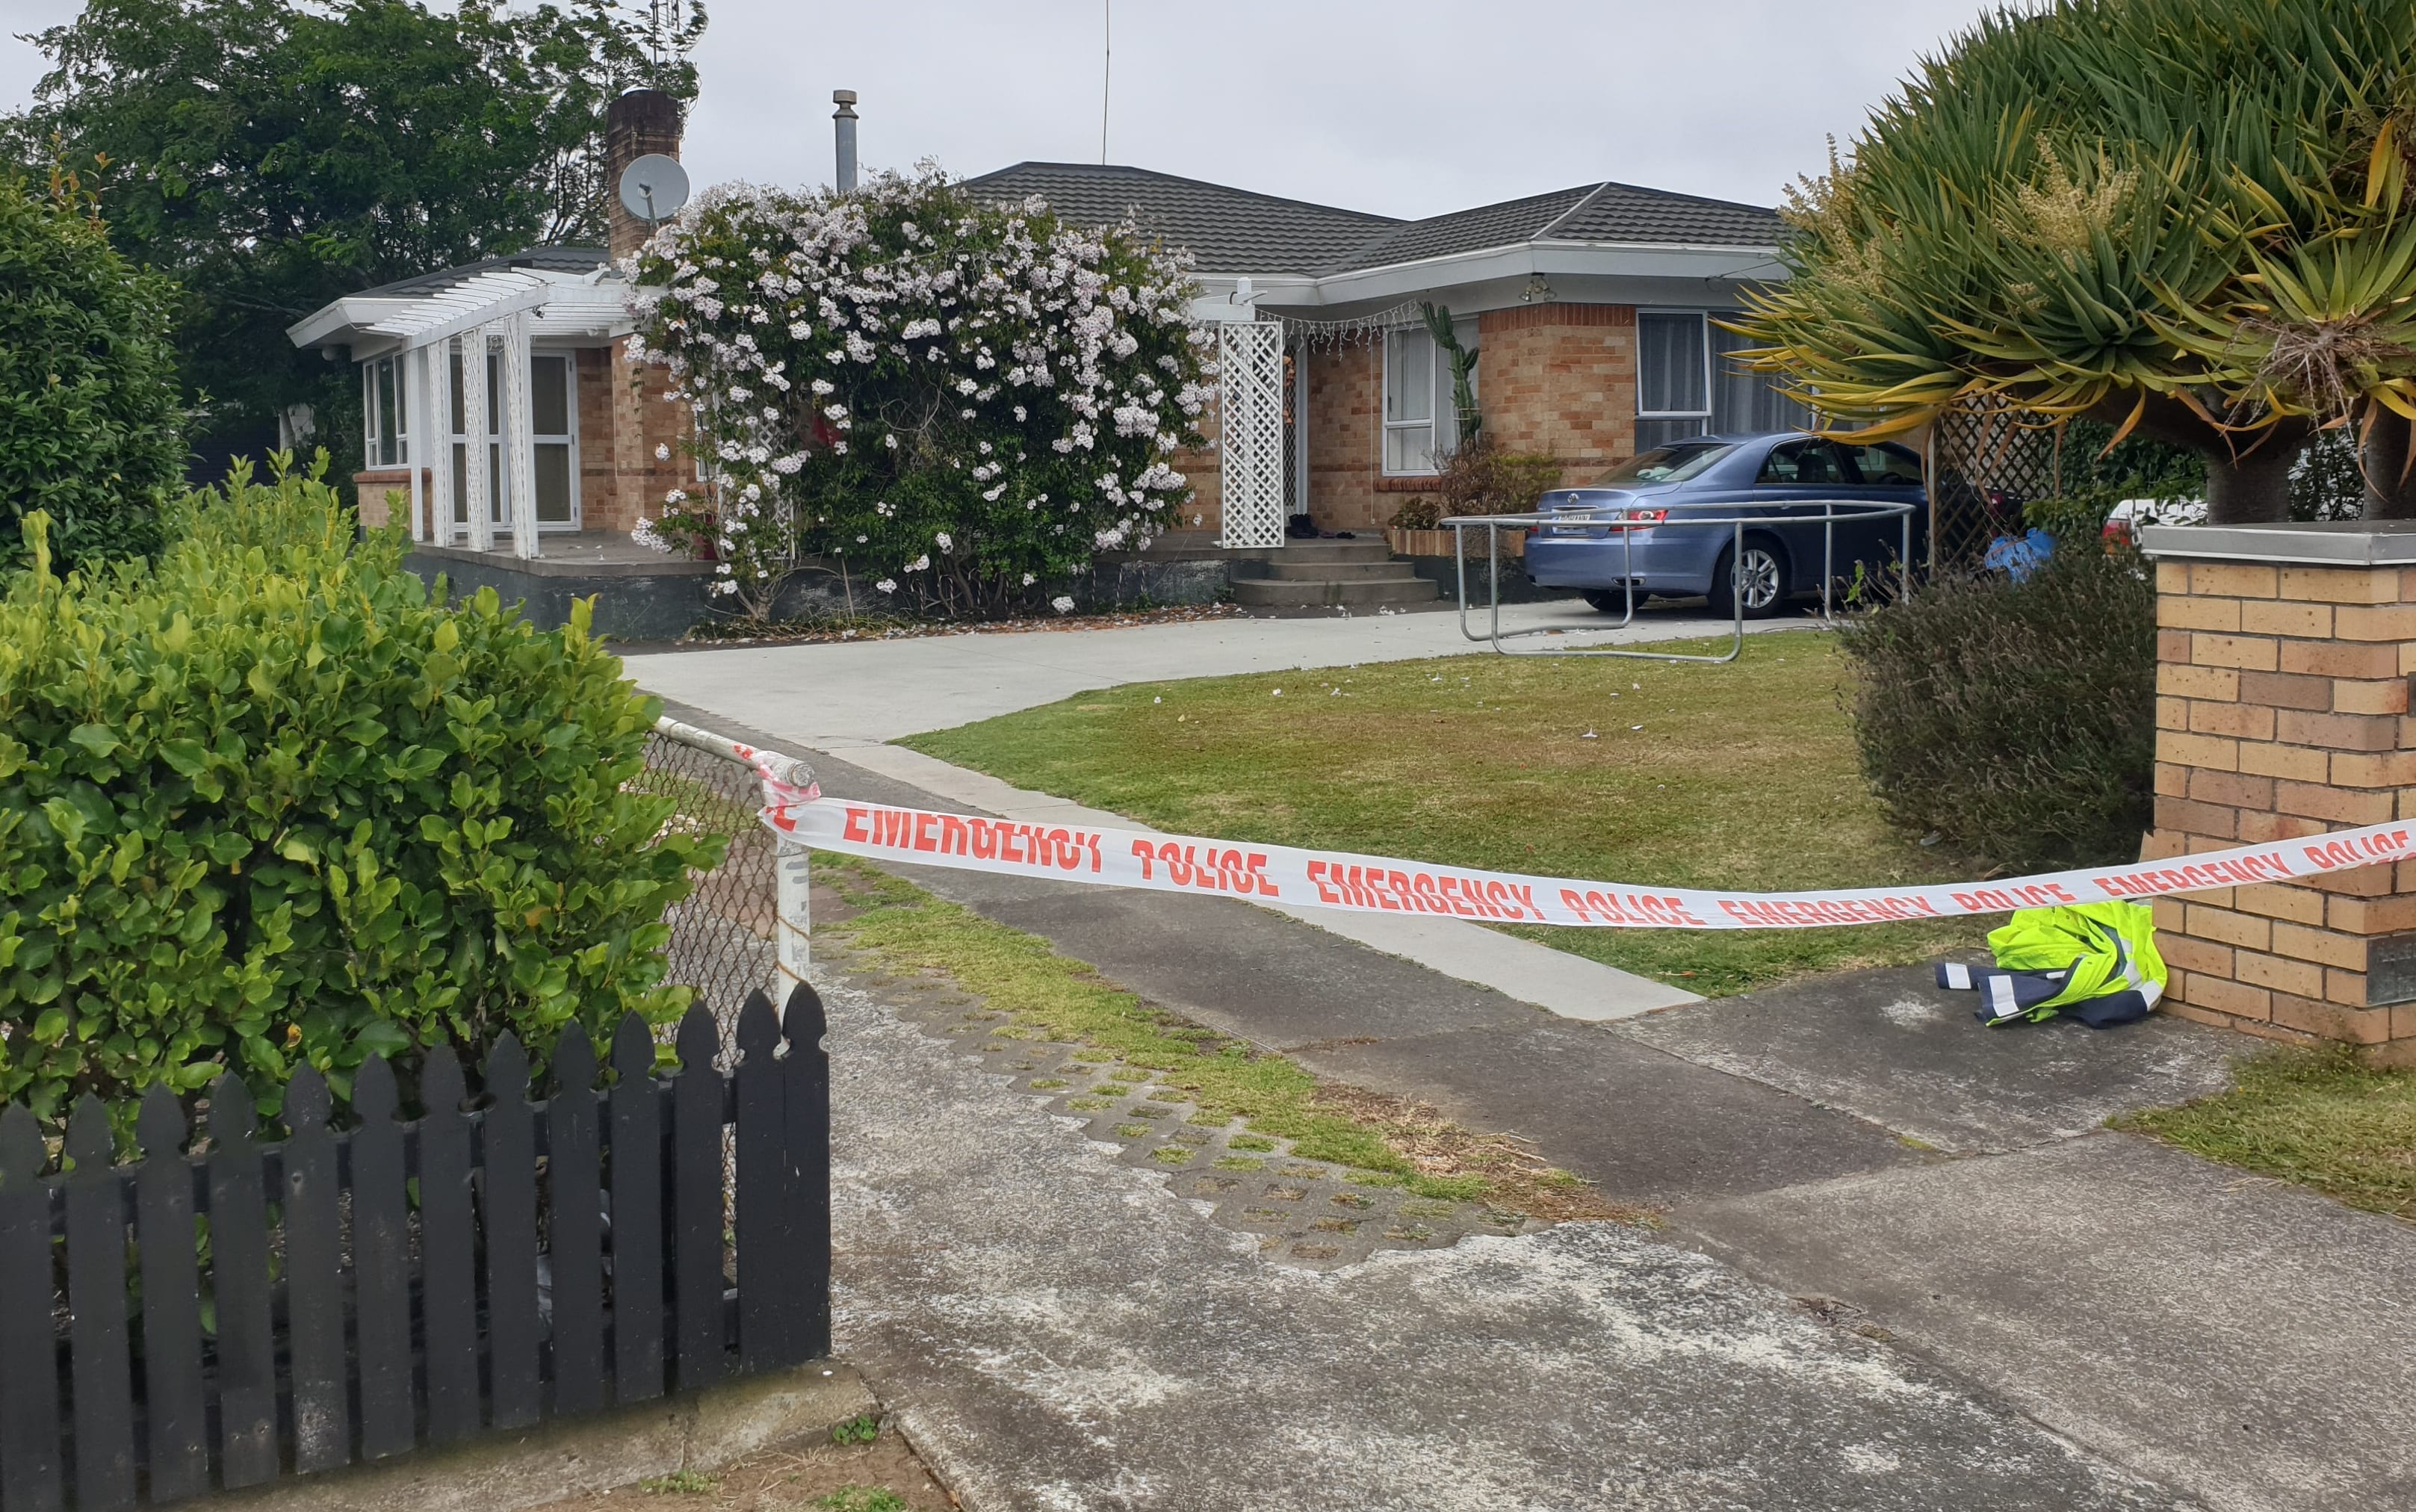 A house in Sunnyside Crescent, Papatoetoe, where two people were found dead and a child has been critically injured after a serious incident in South Auckland.